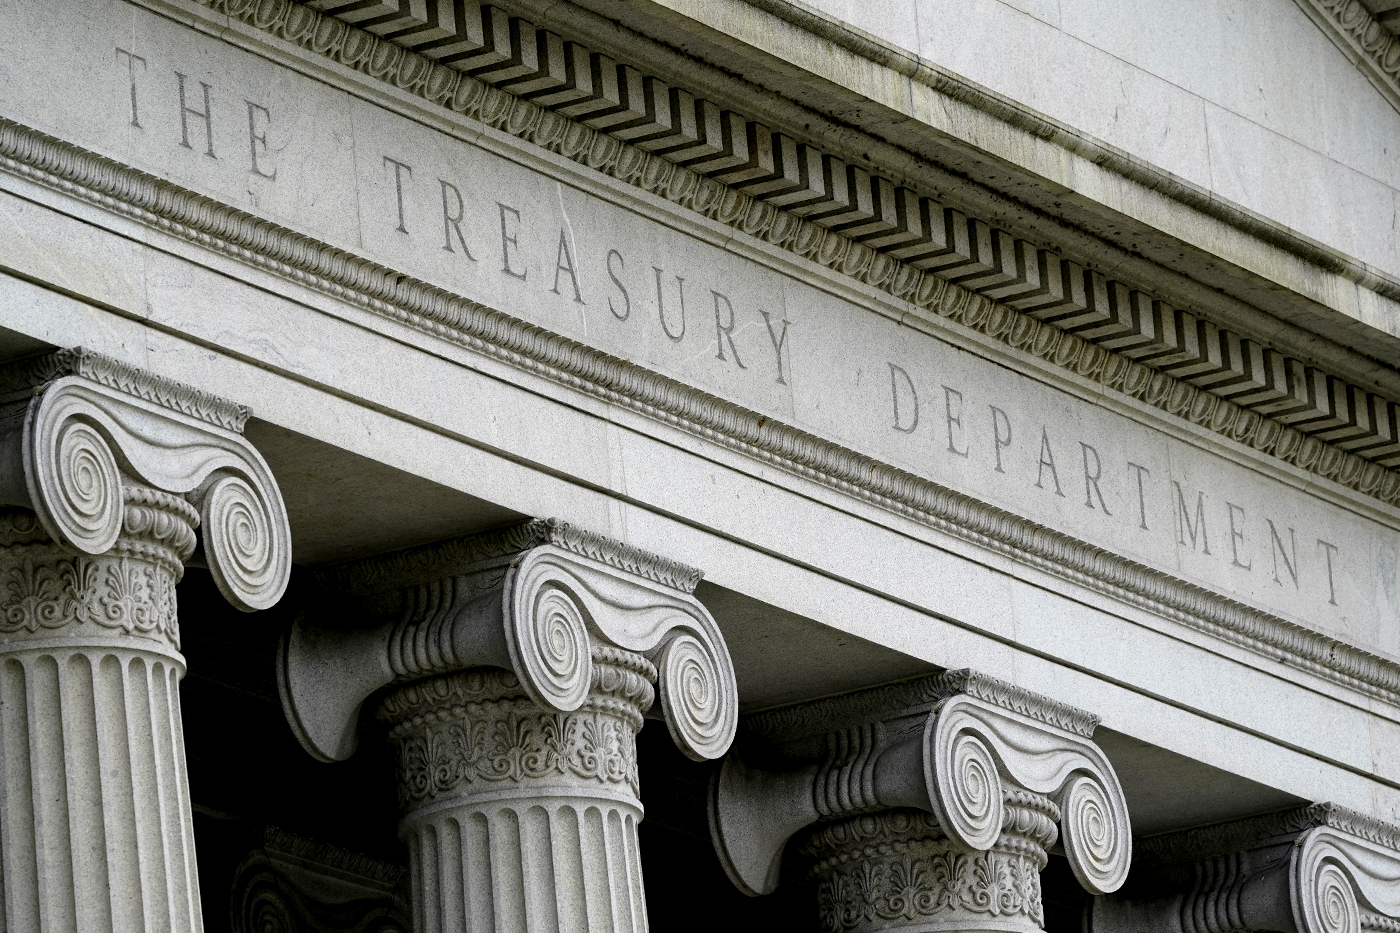 A building engraved with the words "The Treasury Department"